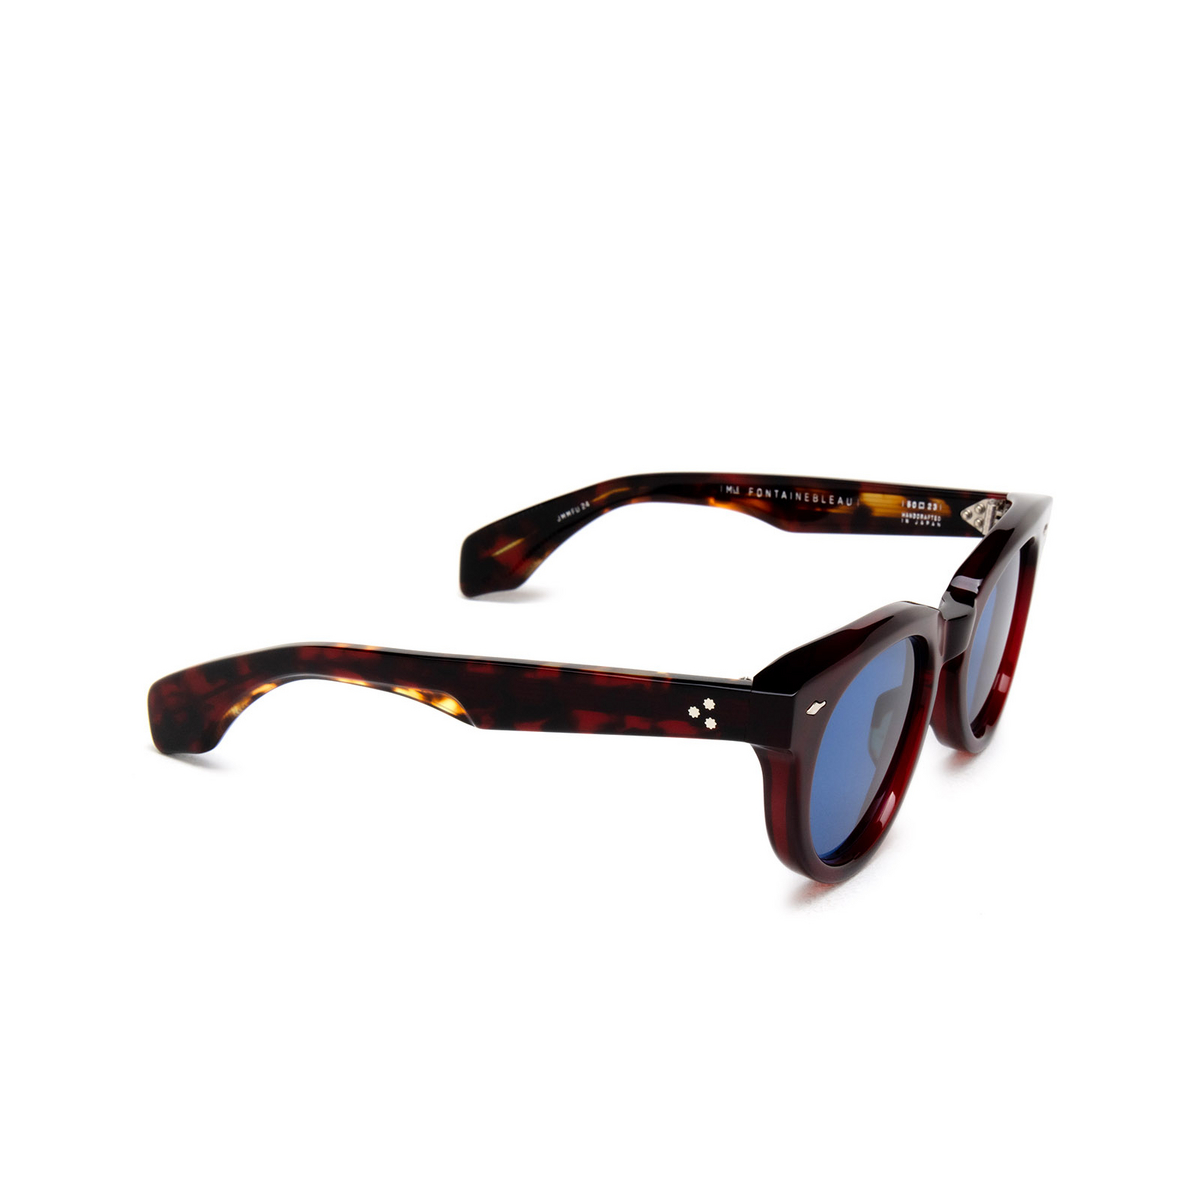 Jacques Marie Mage FONTAINEBLEAU 2 Sunglasses BURGUNDY - three-quarters view